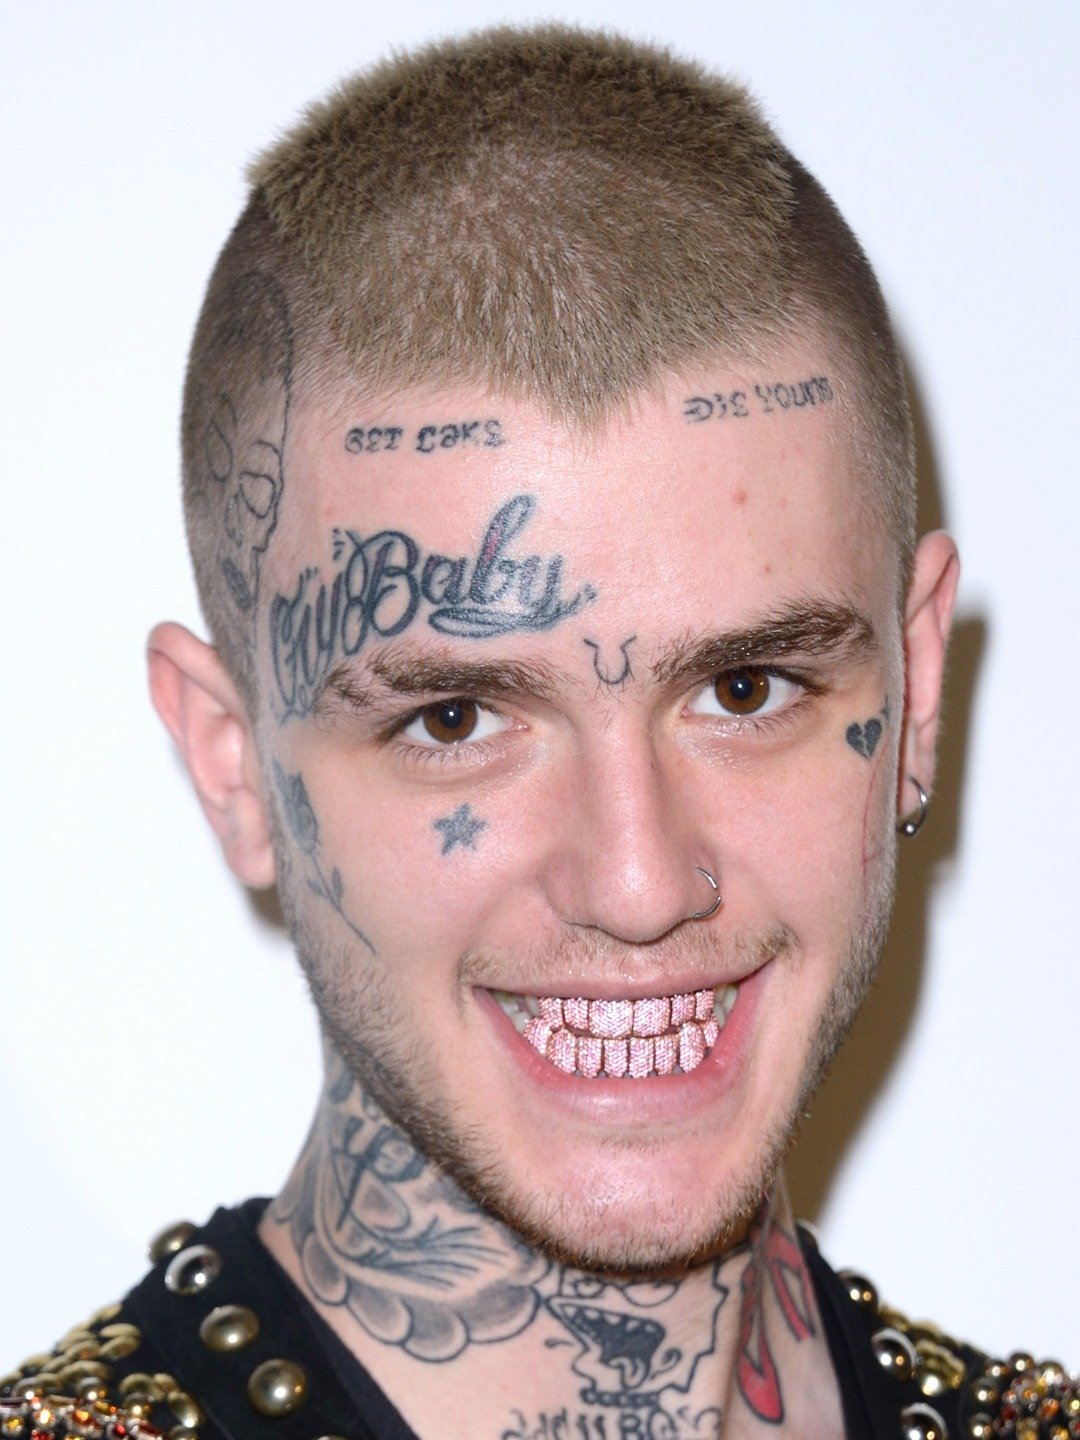 How tall is Lil Peep?